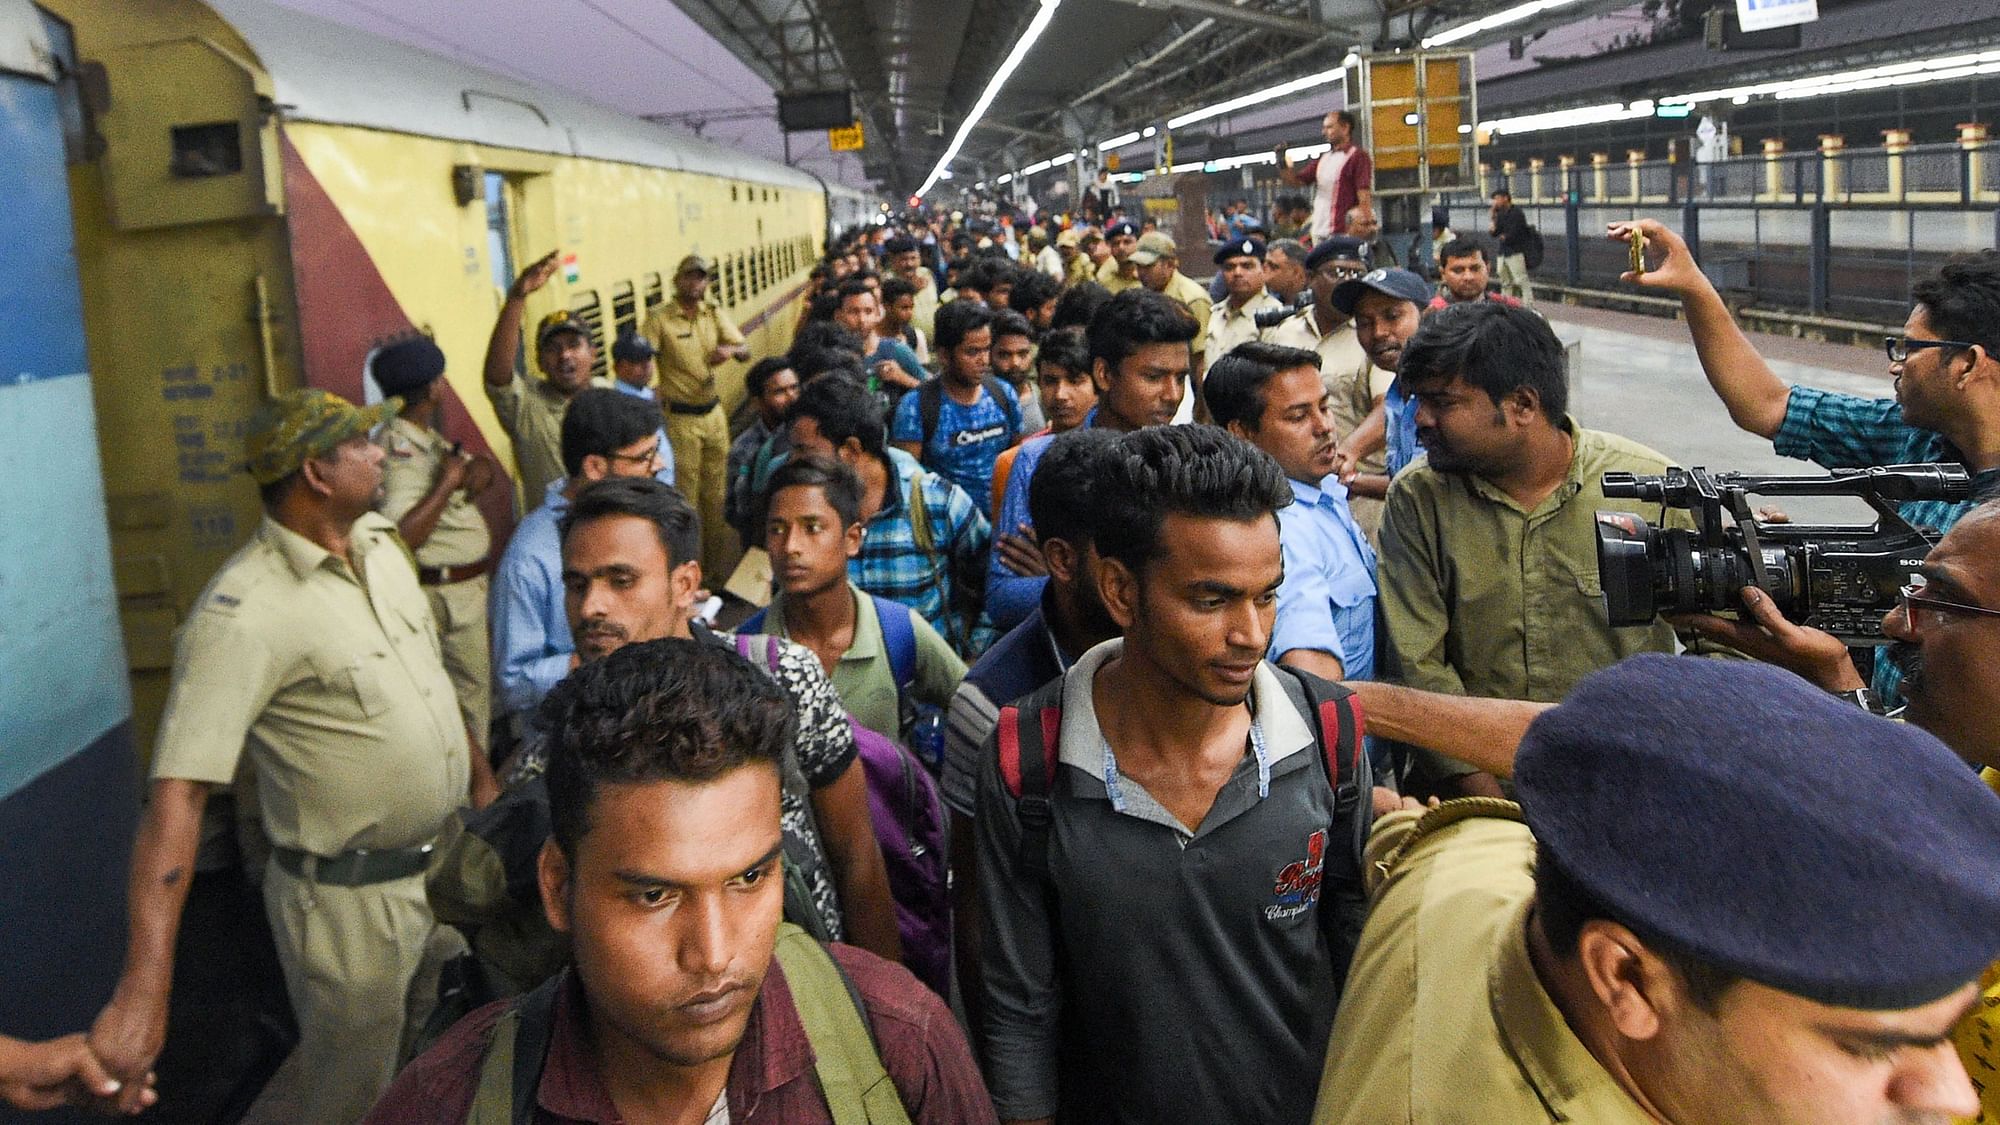 Workers from Jammu and Kashmir arrive at the station in Kolkata.